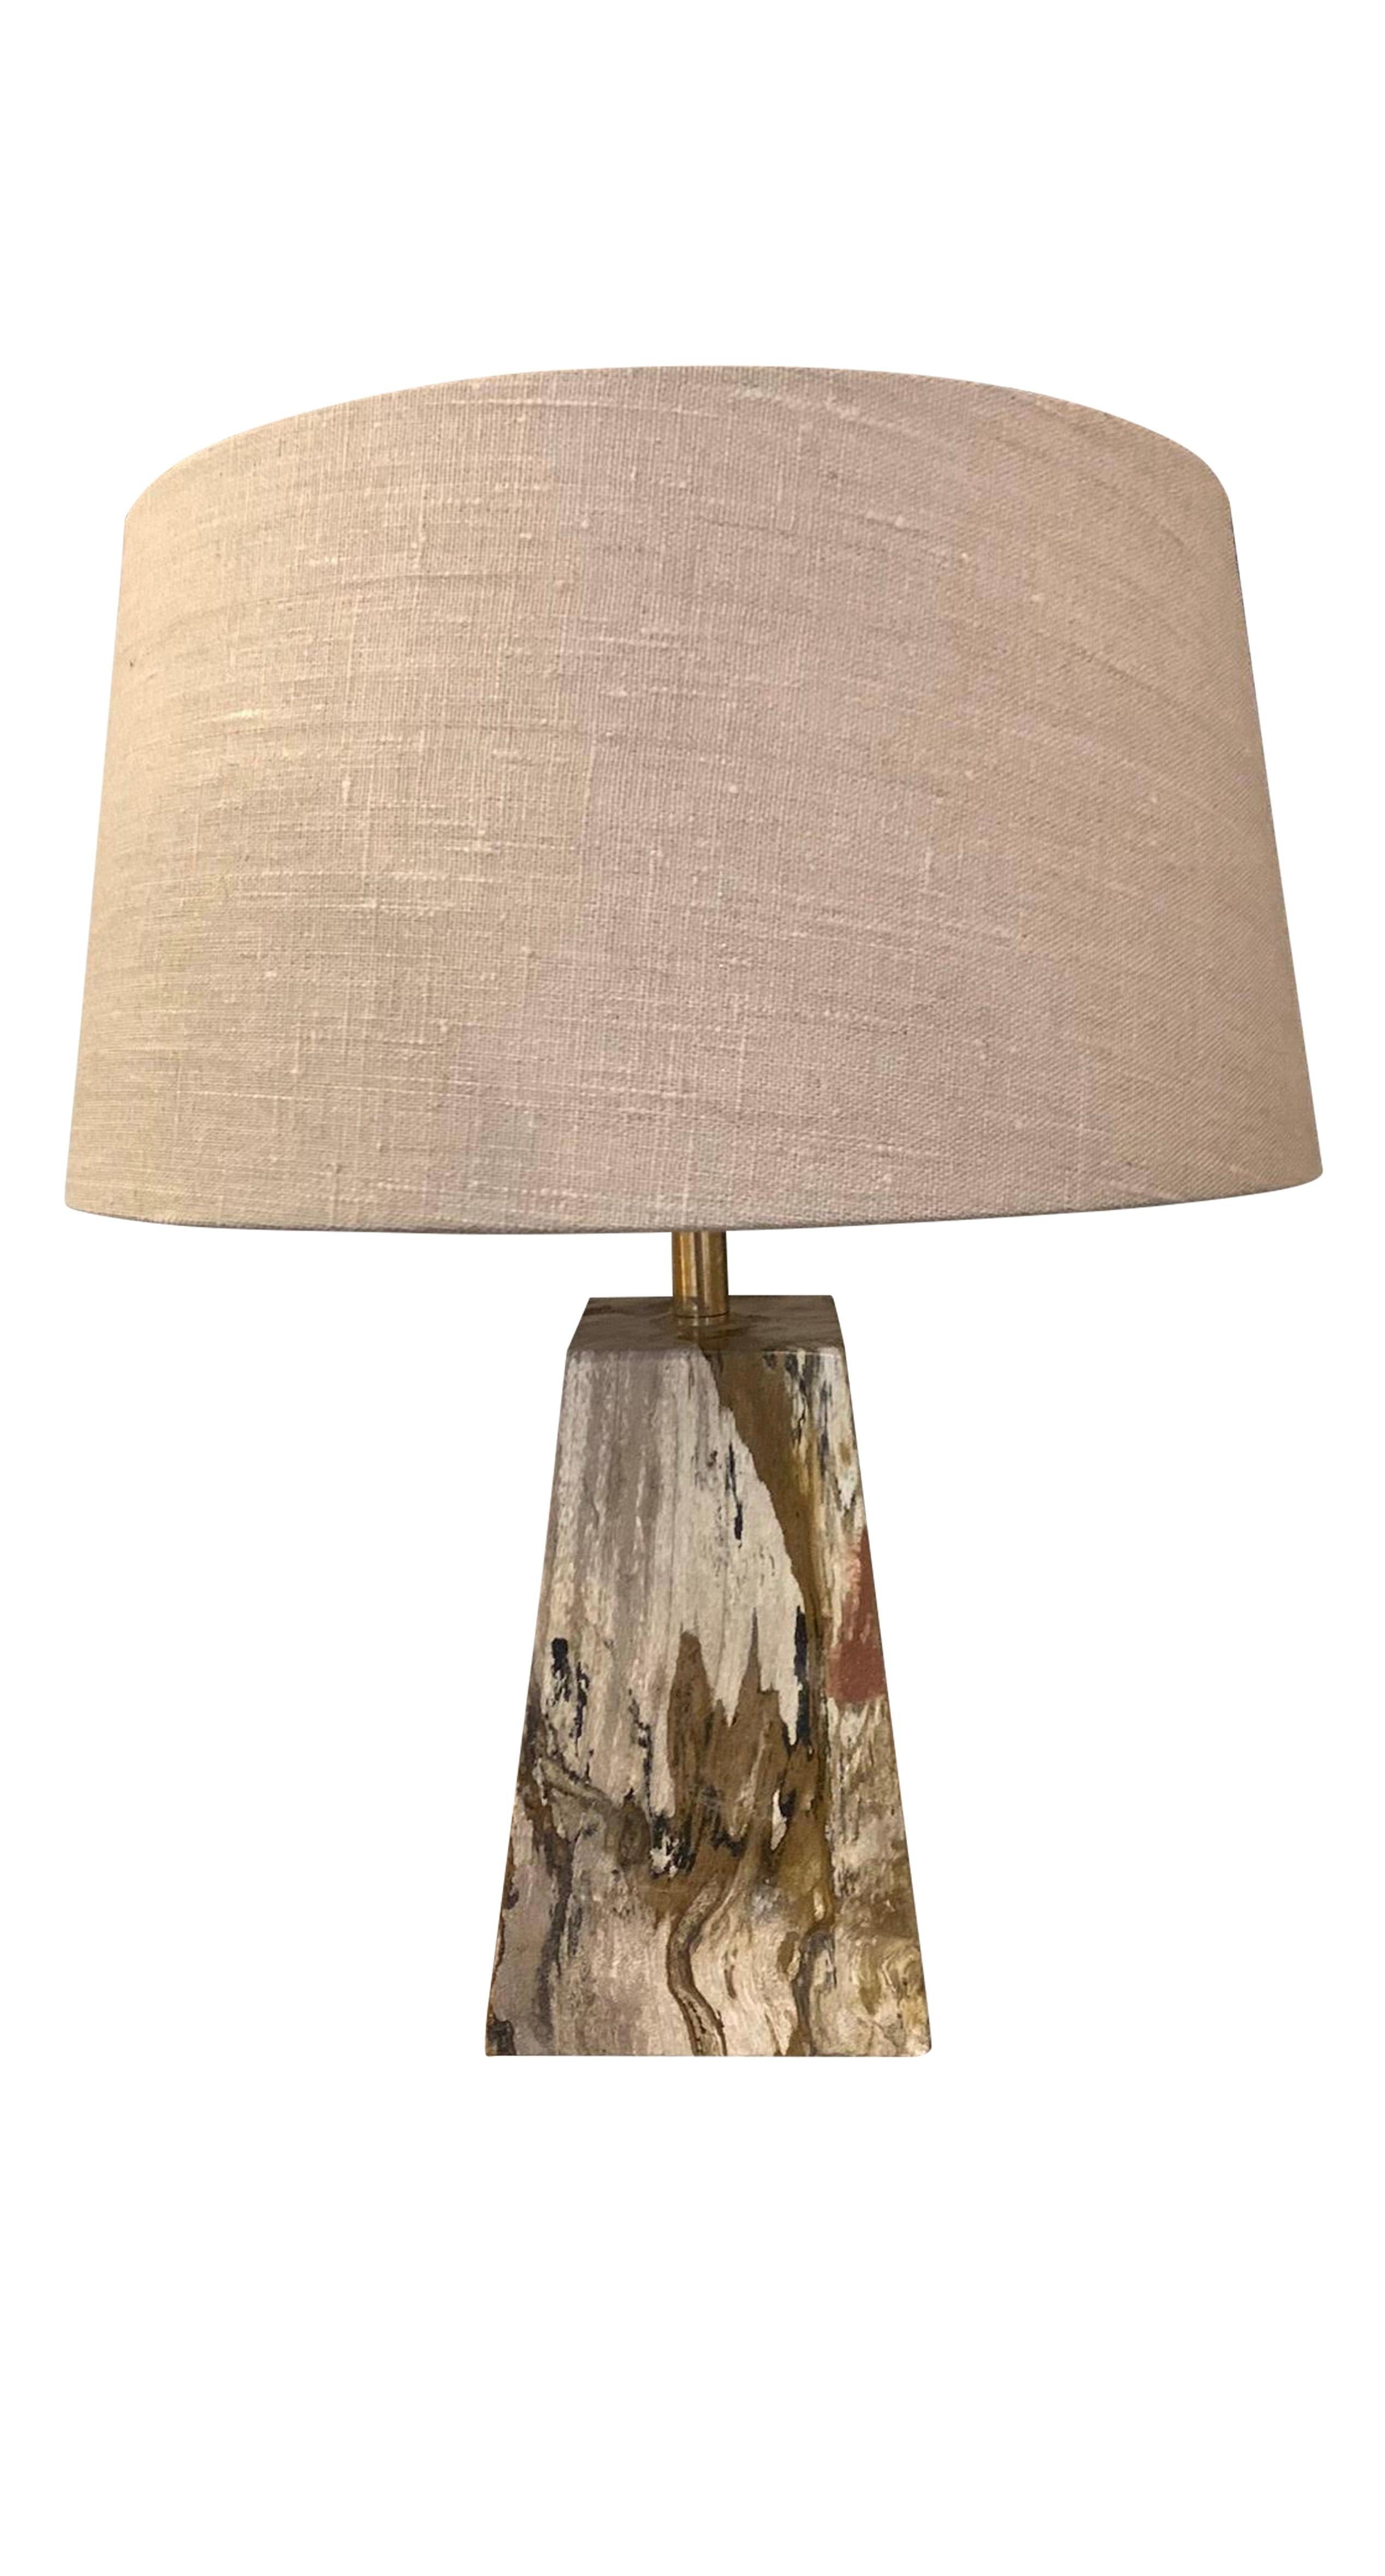 Petrified Wood Single Lamp With Shade, Indonesia, Contemporary 1